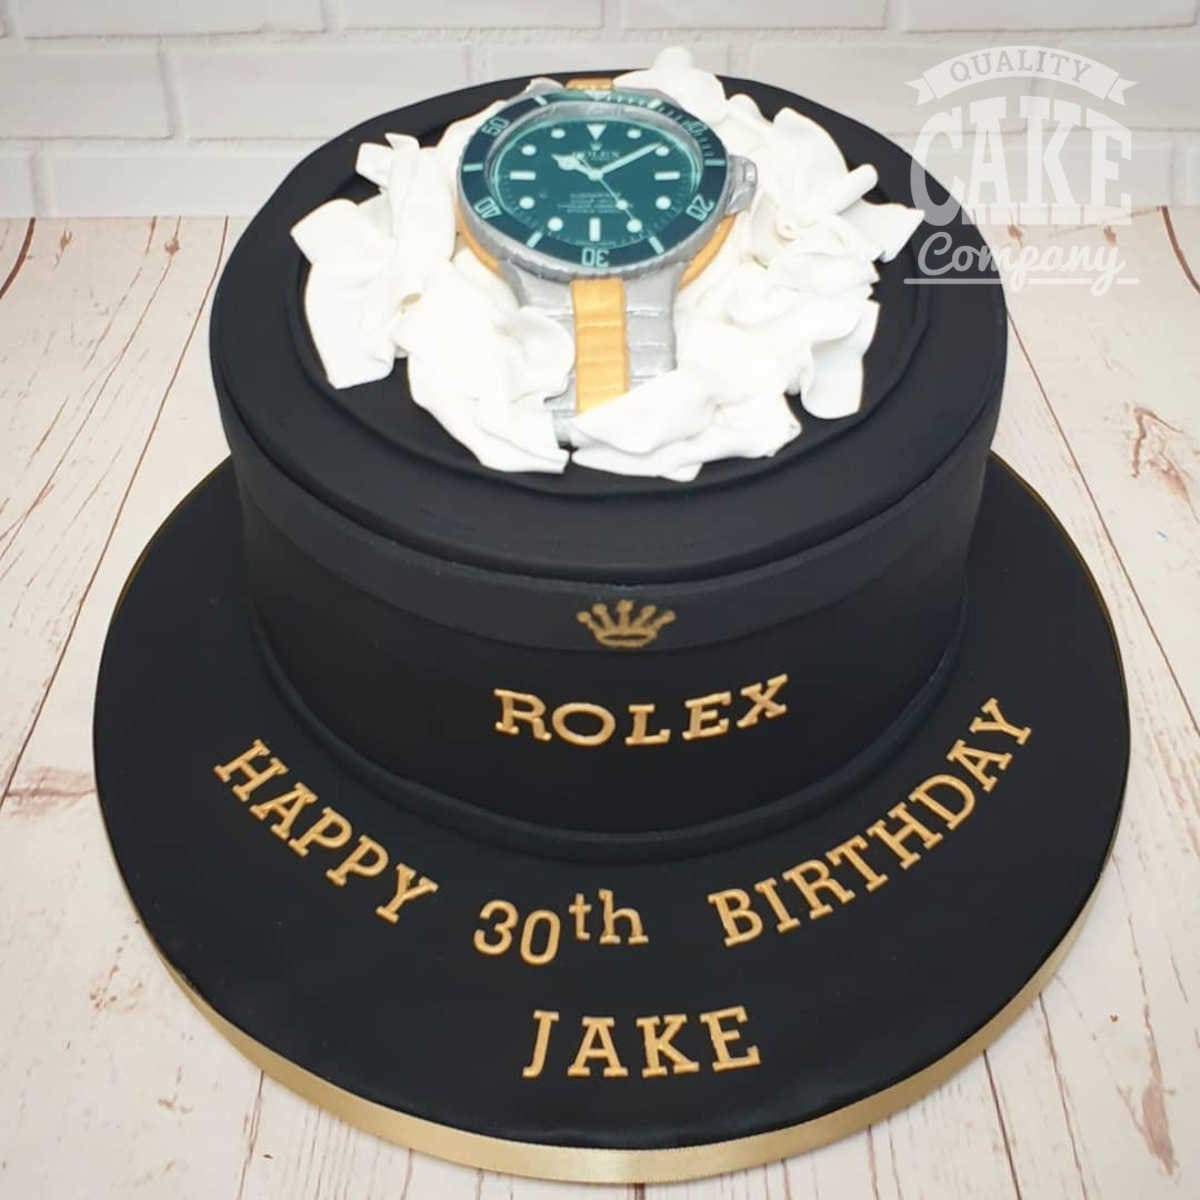 10 New Year Cake Ideas - Find Your Cake Inspiration